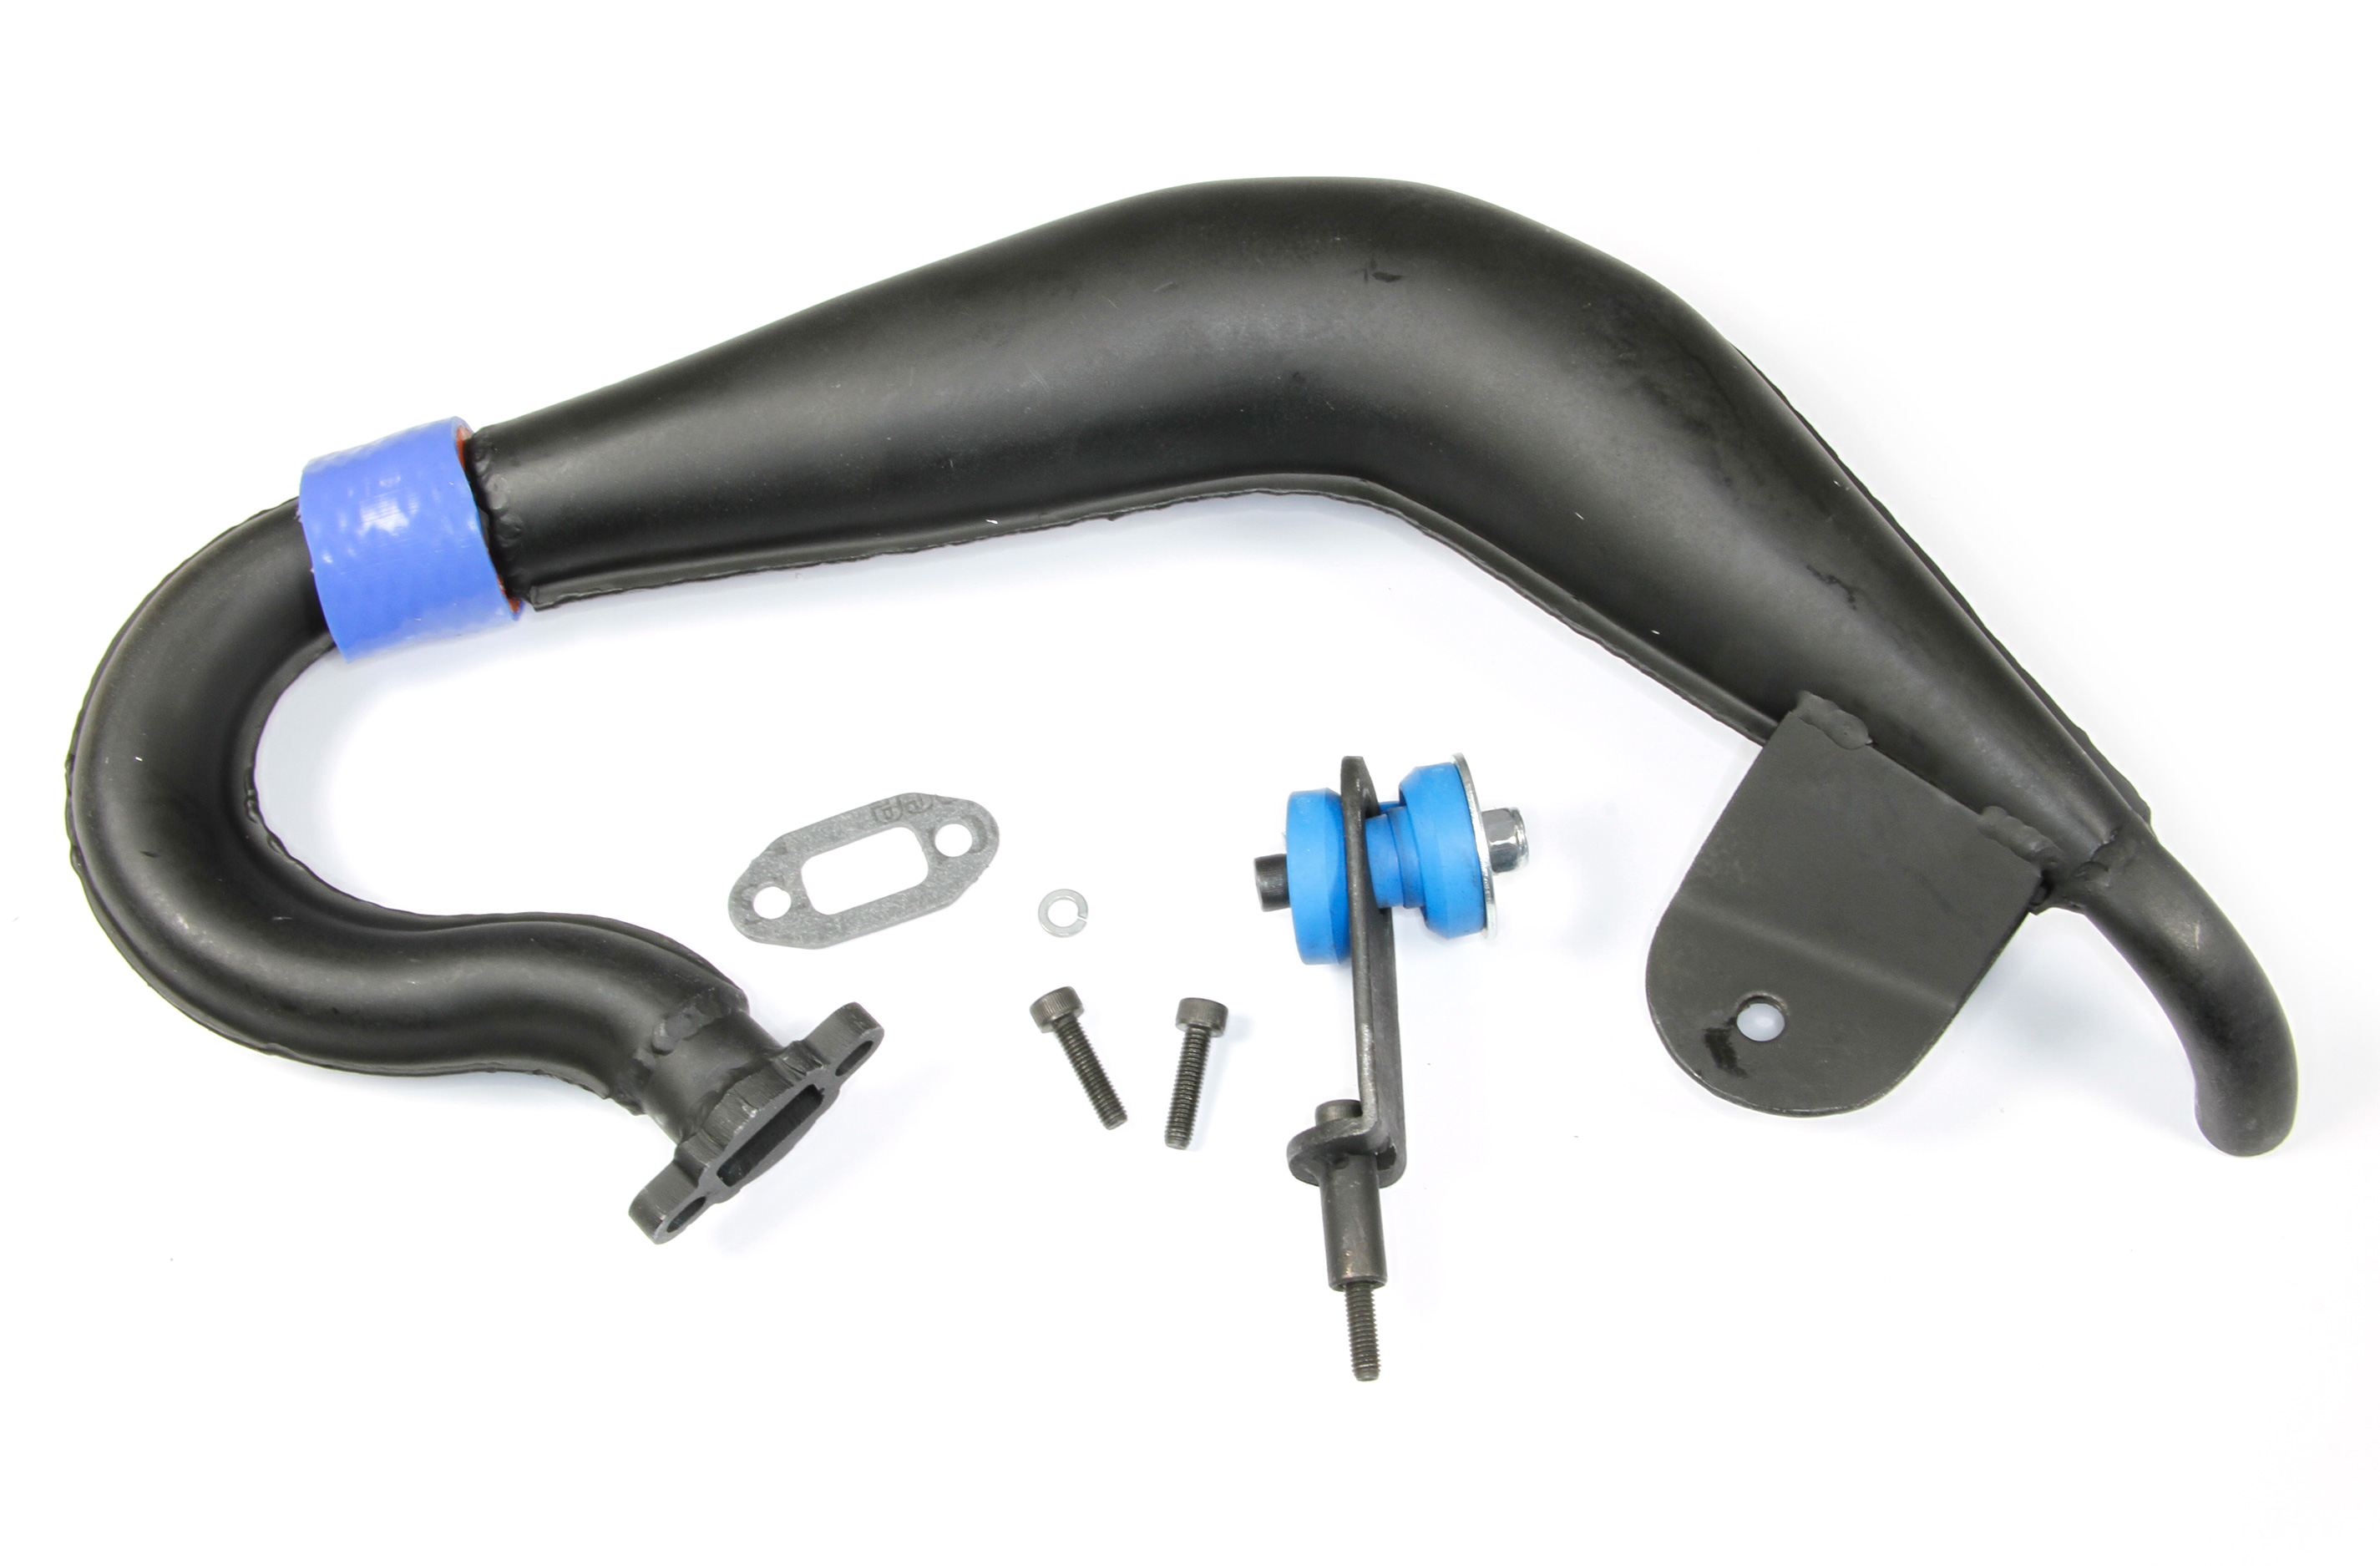 LOSR 8020 Tuned Exhaust Pipe, for 23-30cc Gas Engines 5ive-T/2.0 and Mini